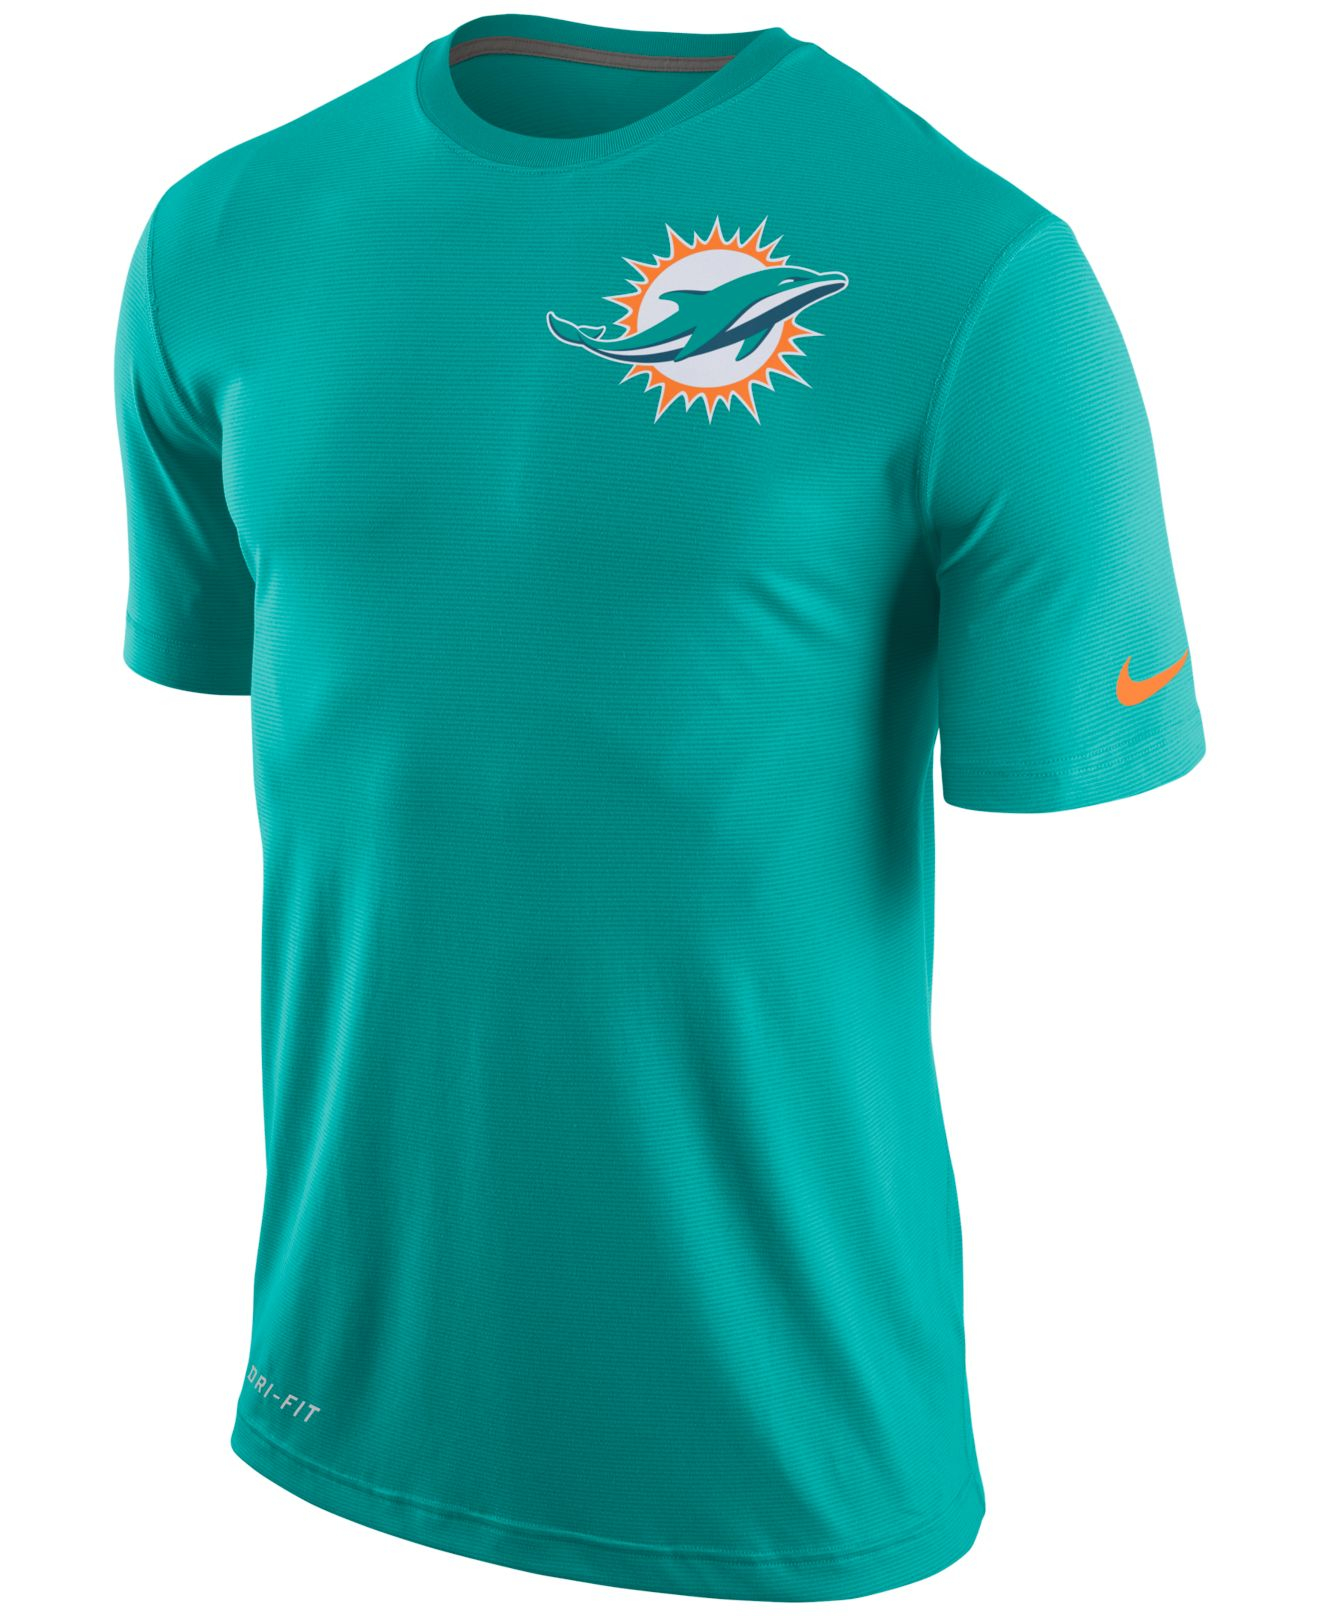 Lyst - Nike Men's Miami Dolphins Dri-fit Touch T-shirt in Blue for Men